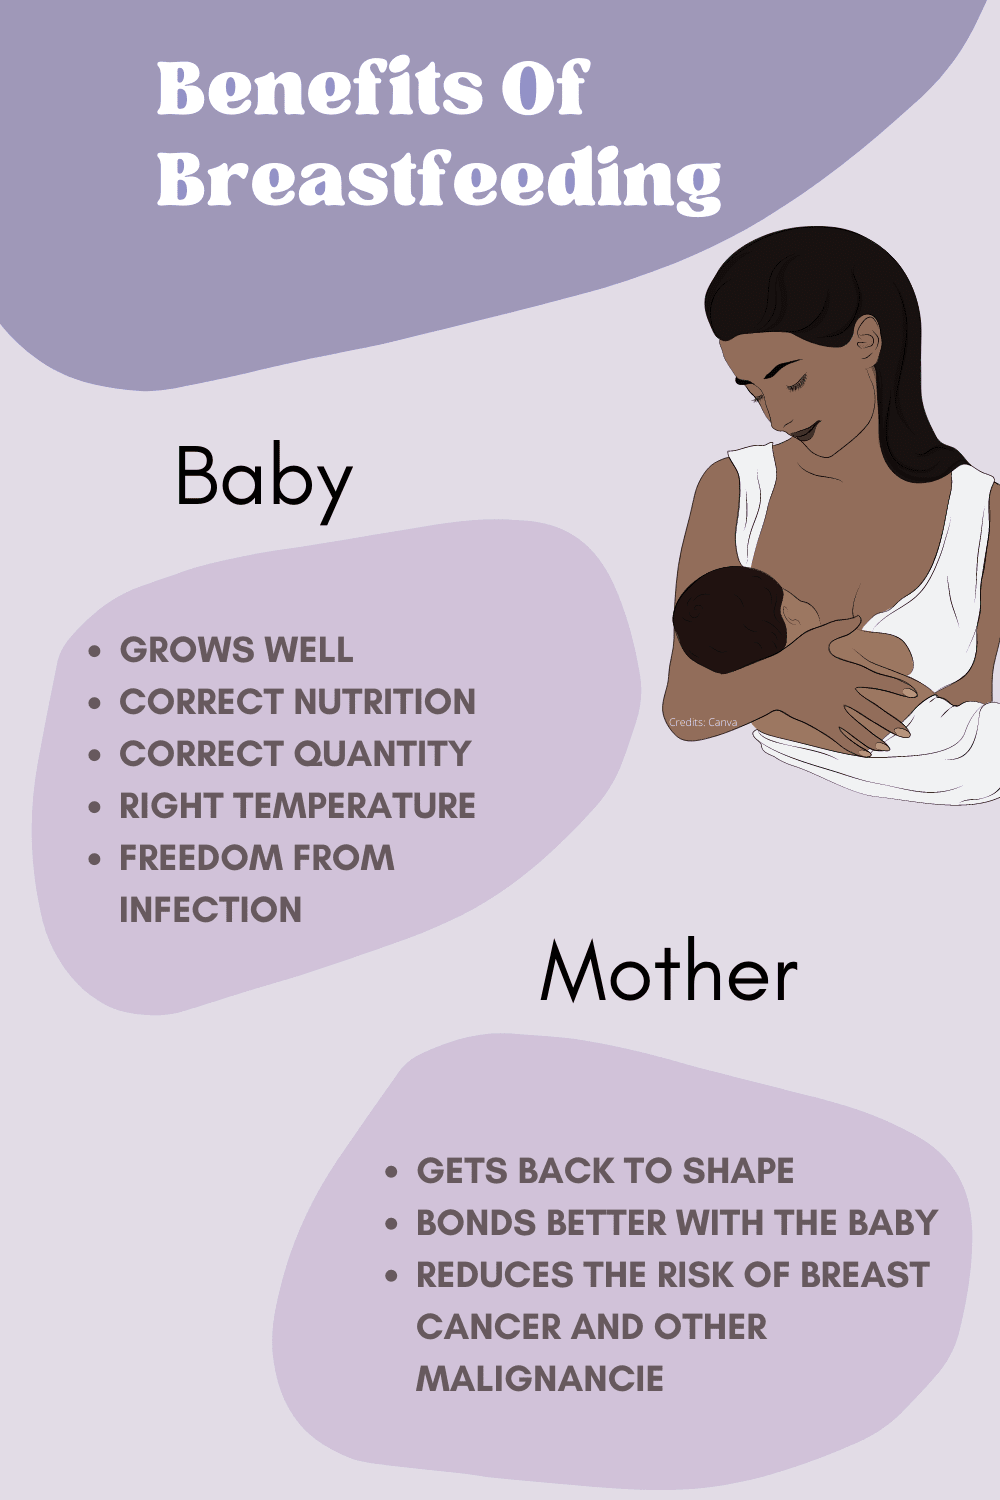 Benefits Of Breastfeeding For The Mother And Baby Simply Life Tips